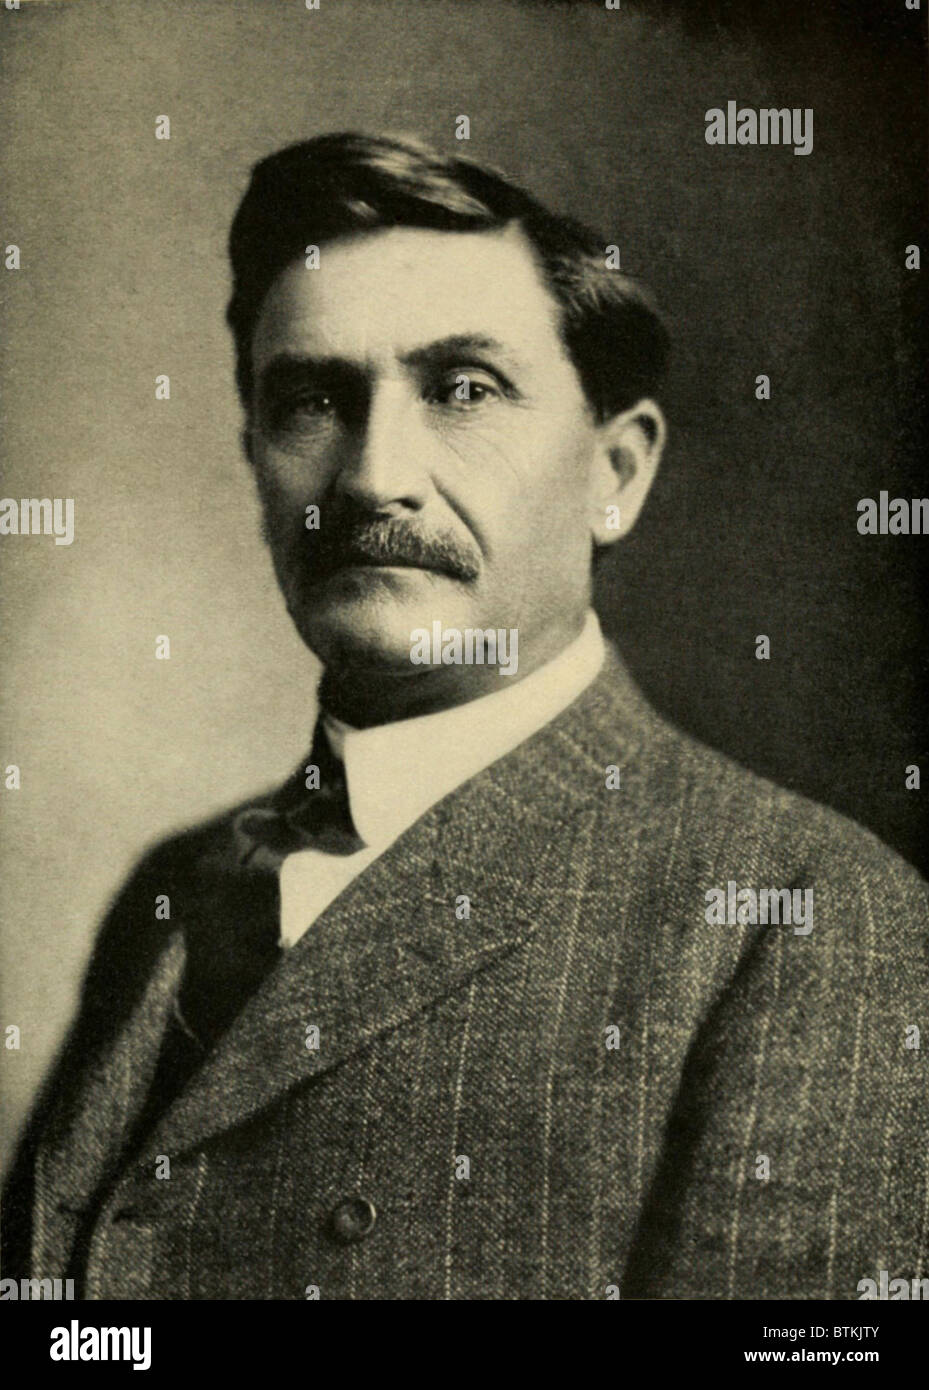 Pat Garrett (1850-1908), sheriff of Lincoln County, New Mexico, captured Billy the Kid on December 20, 1880. After his trial and death sentence, the Kid escaped in April 1881. Garrett tracked him down in Fort Sumner, NM, ambushed and killed the Kid in a hotel room on July 14, 1881. Stock Photo